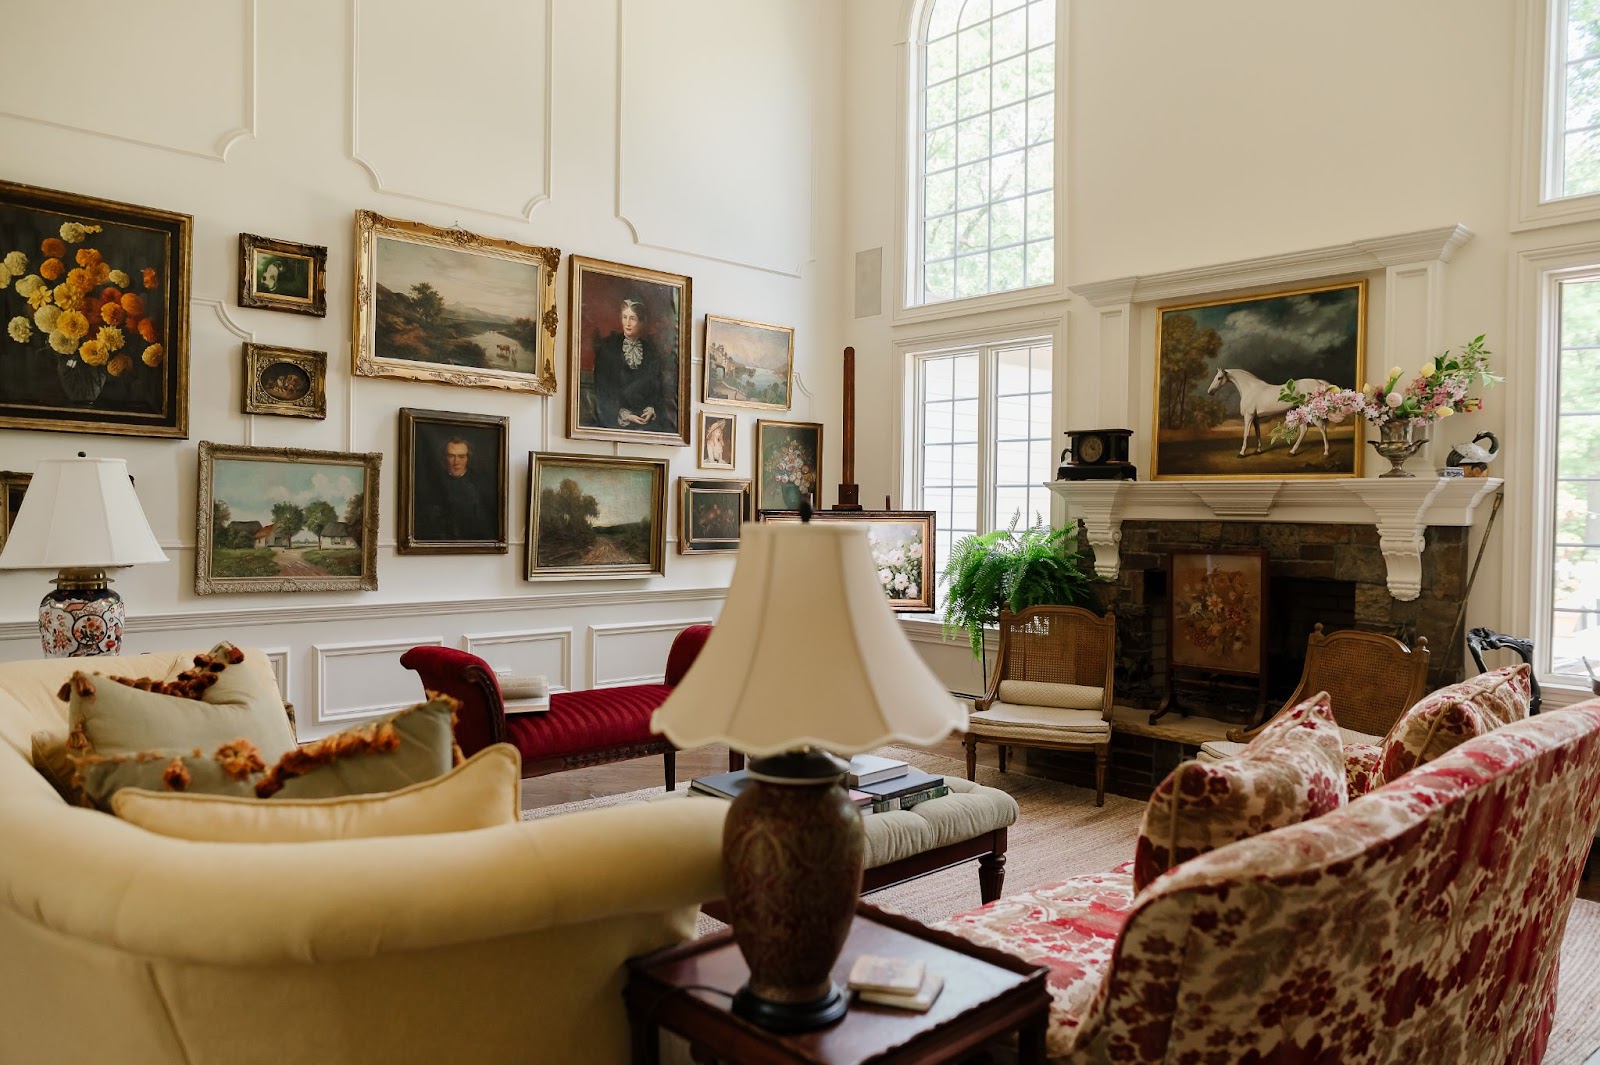 A high-ceiling and nicely appointed living room with palladian windows and warm white walls features a collection of beautifully framed wall art including portraits, equestrian scenes and landscapes.